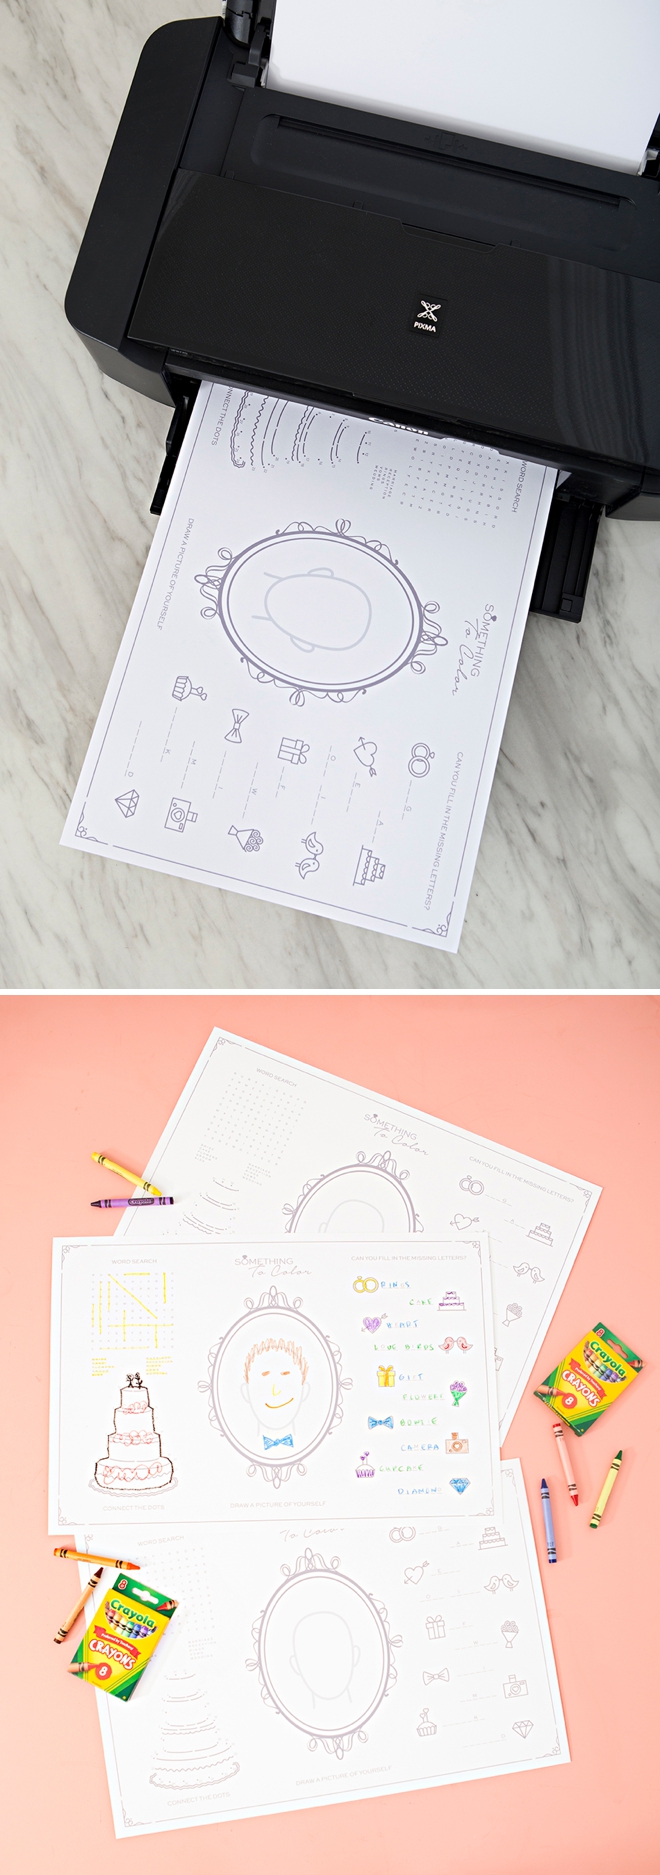 Check out these FREE printable wedding activity placemats for kids!